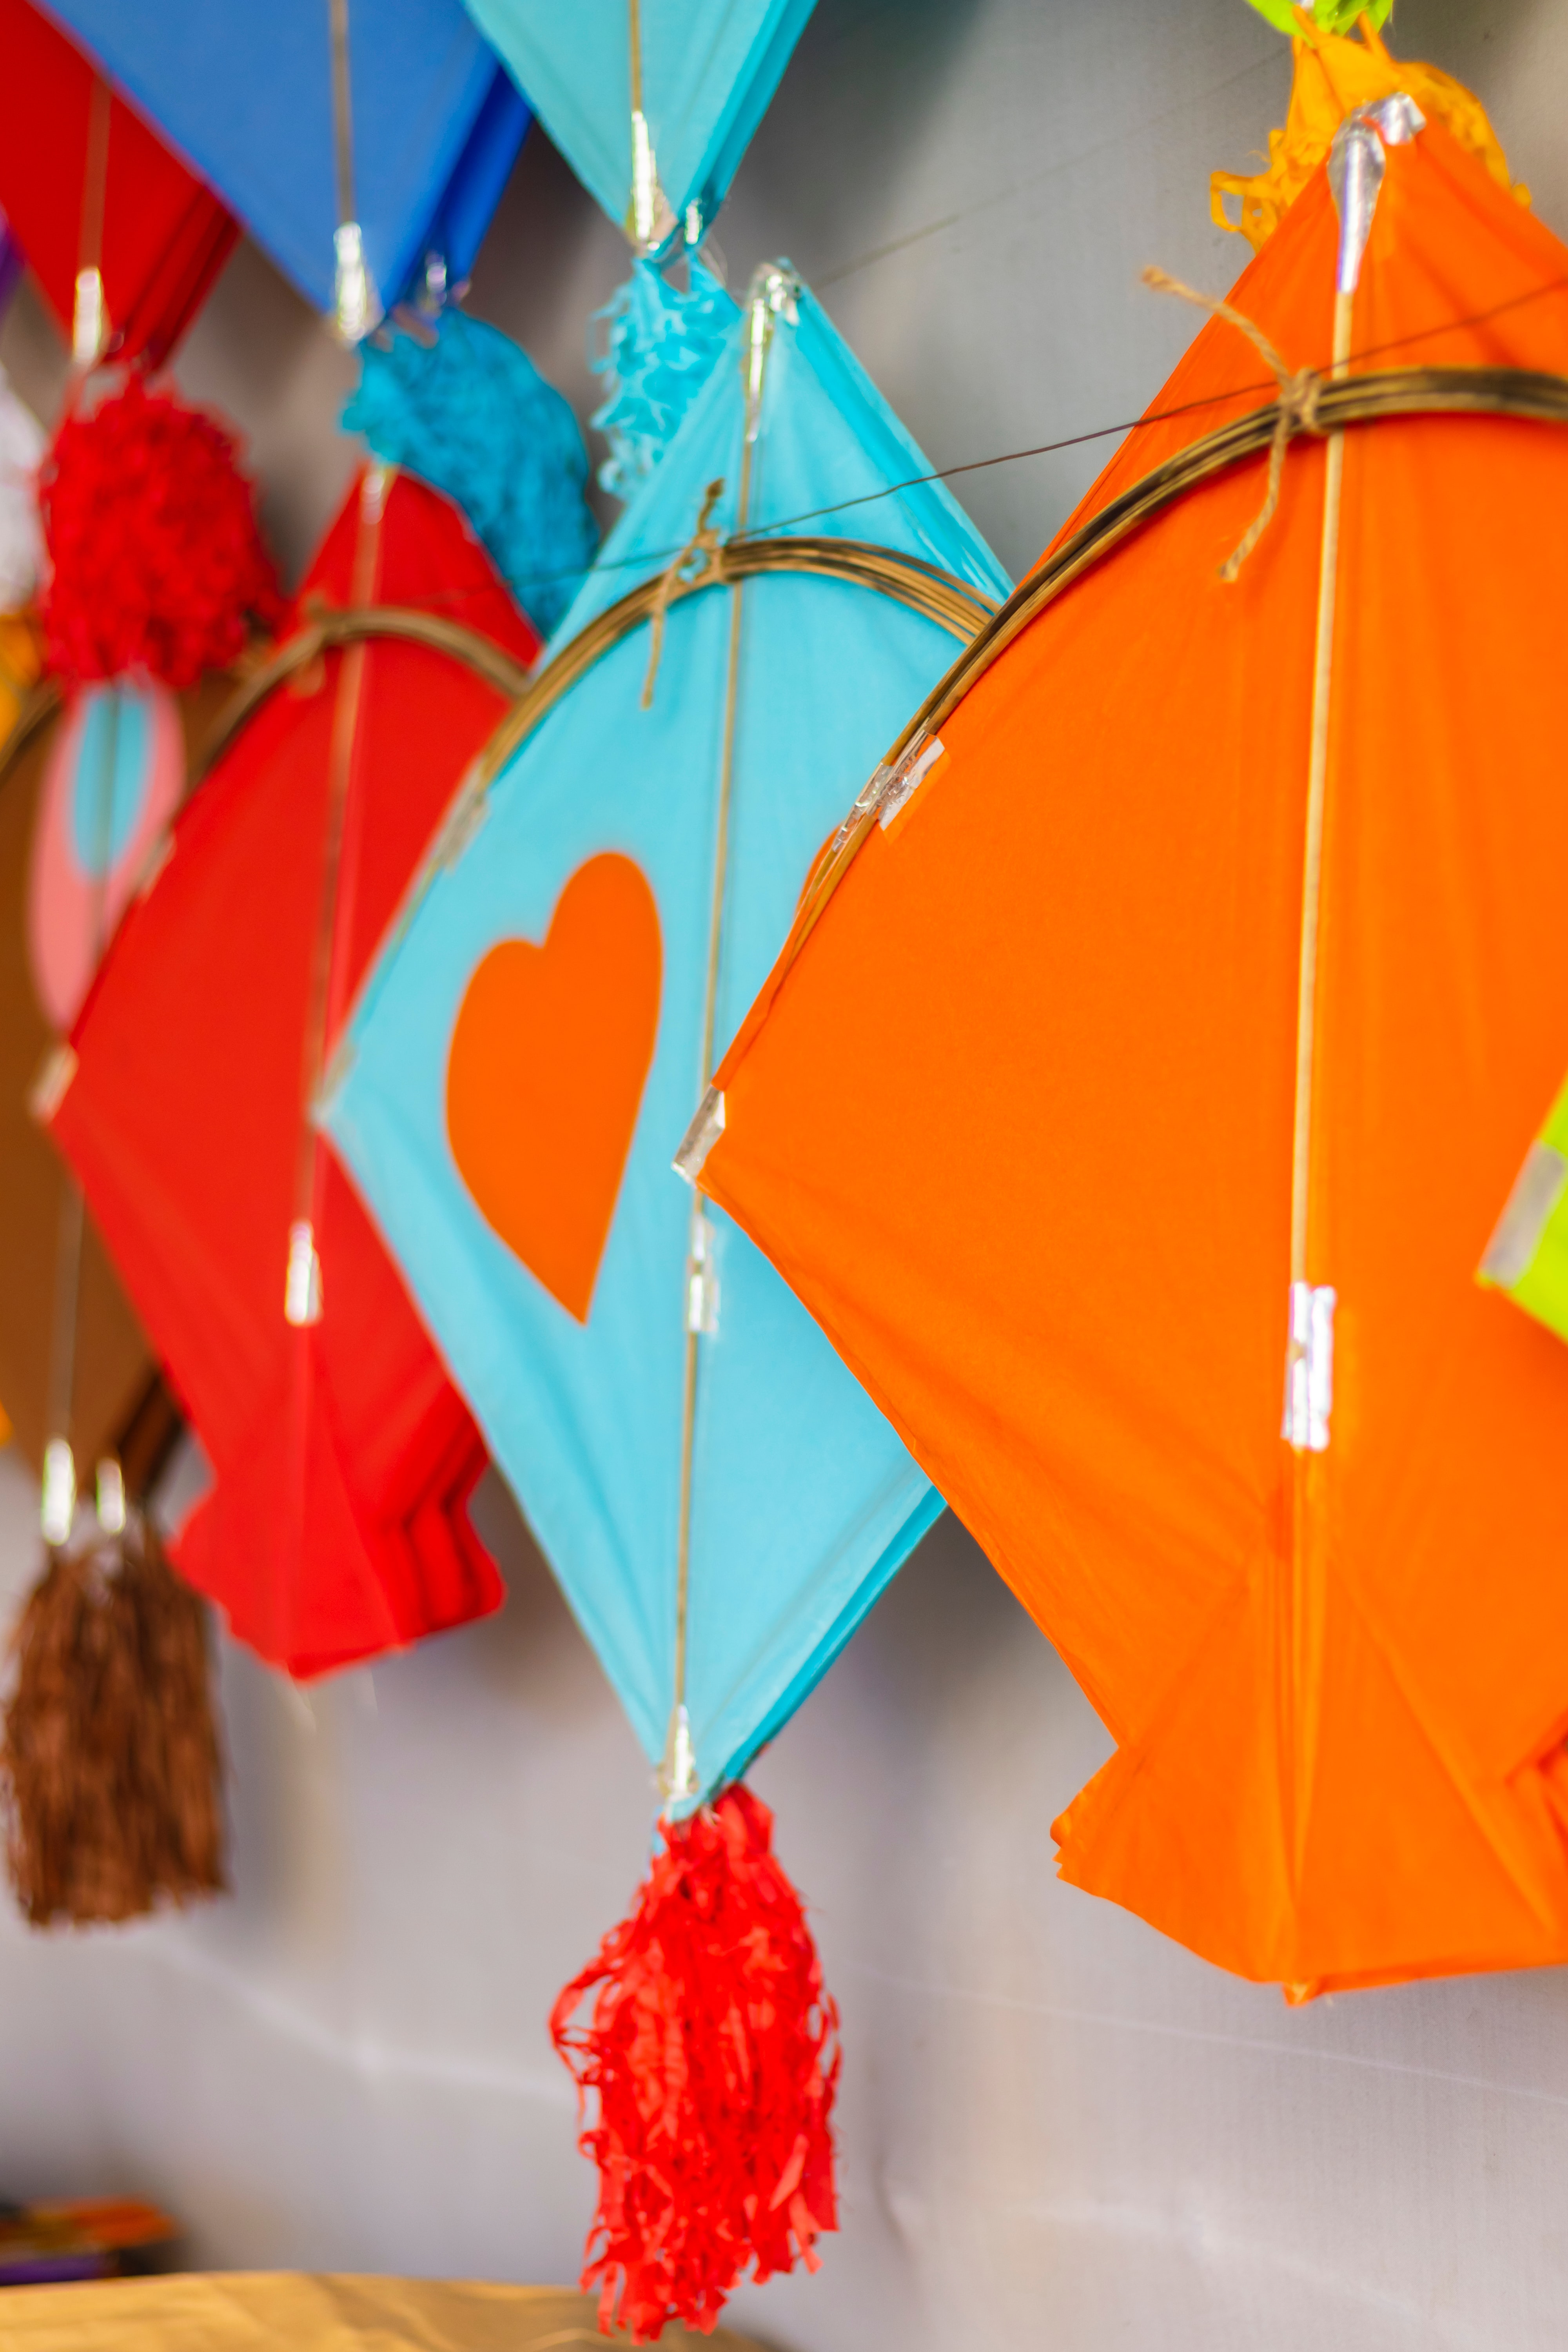 Colorful kites hanging on wall